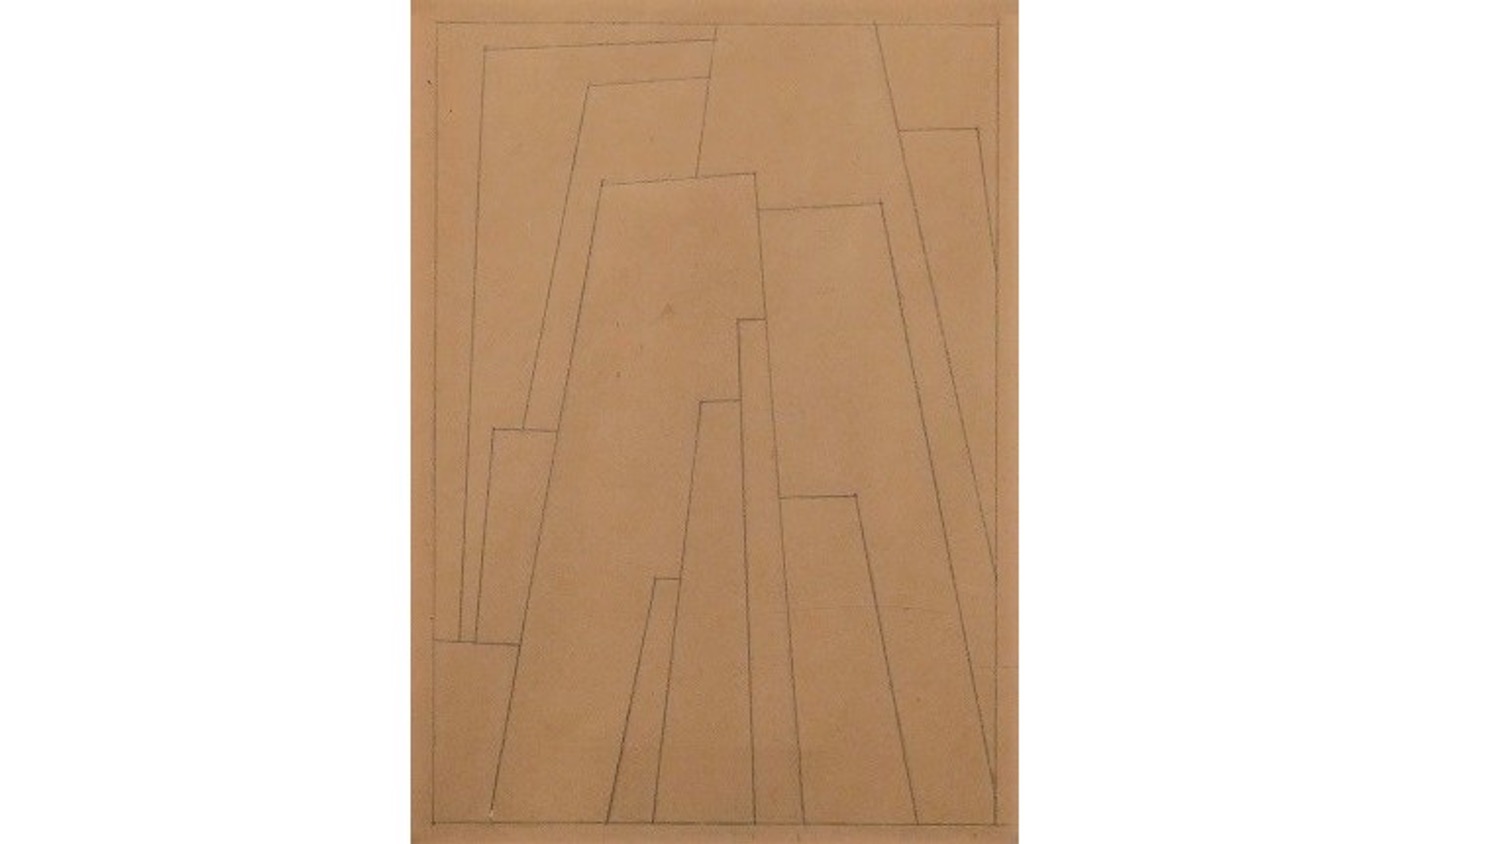 Ana Sacerdote. Argentinean artist, born in Rome, emigrated to Buenos Aires during the Second World War 1925-2019. "Linear theme", 1956. Pencil on paper. 21 x 15,5 cm.